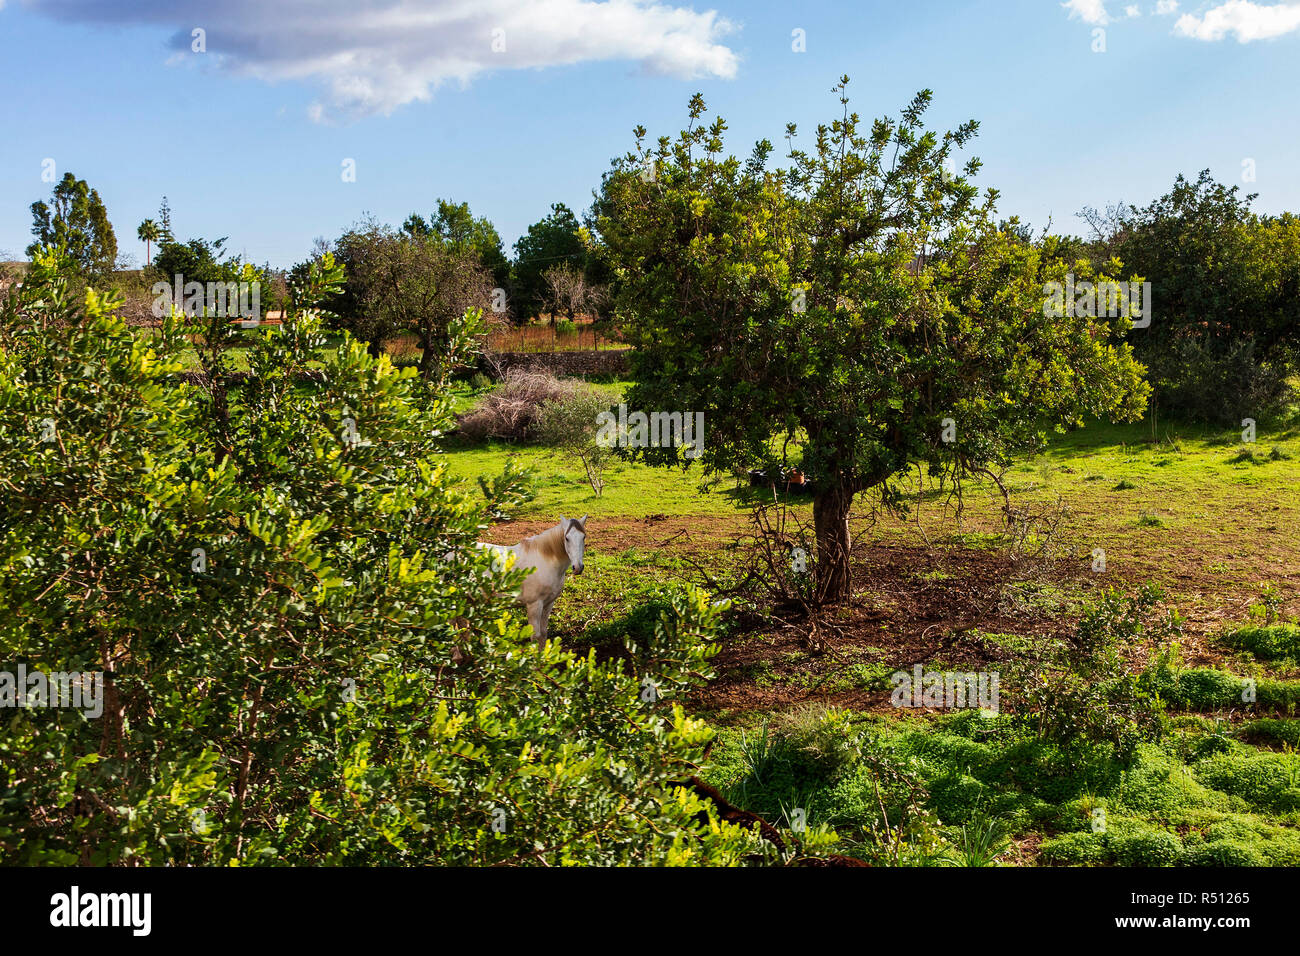 Mallorcan countryside with a white horse and trees, Mallorca, Majorca, Balearic Islands, Spain Stock Photo